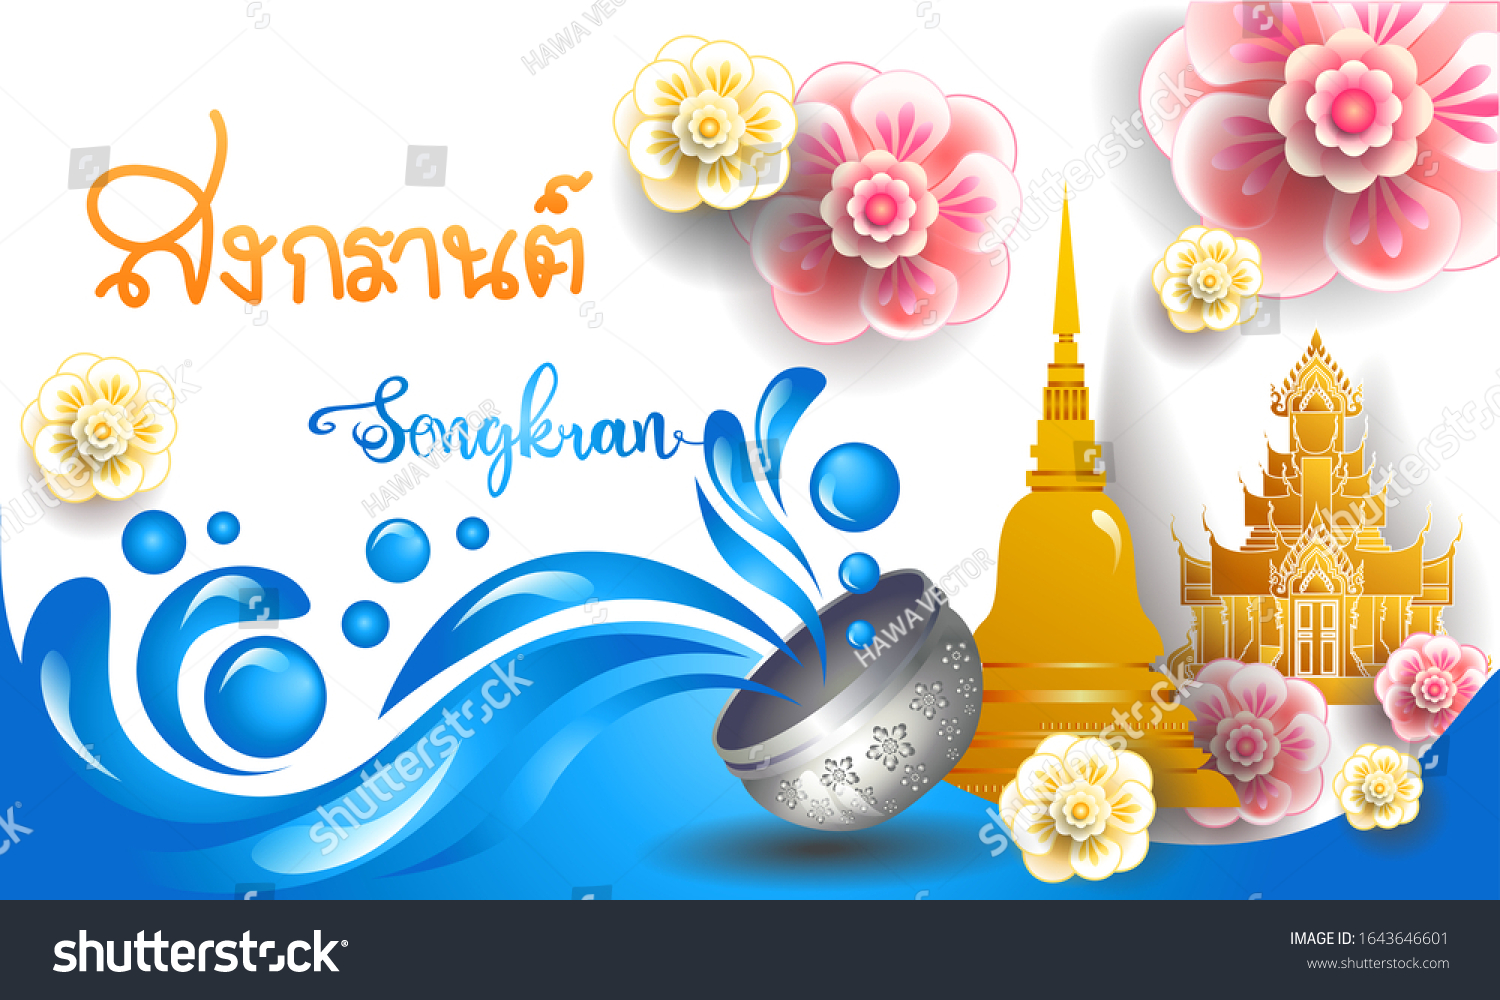 Unique Greetings Card Happy Songkran Celebrate The Thai New Year With This Beautiful